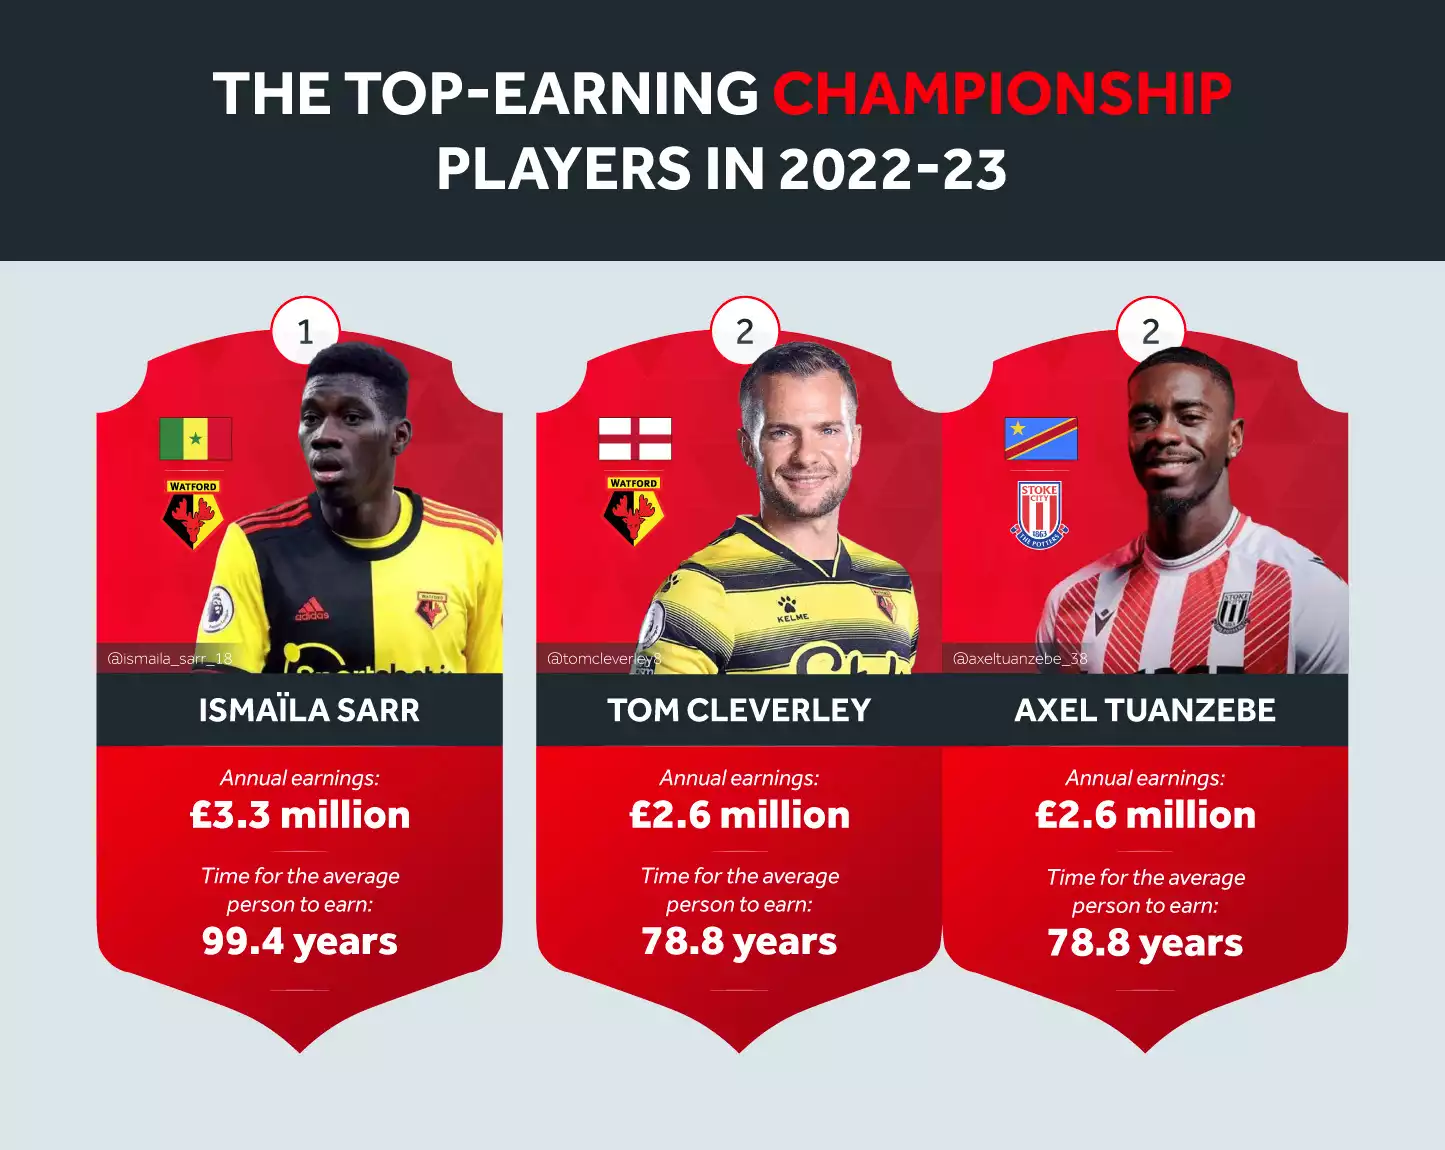 Top 3 Top-earning Championship Players 2022-23